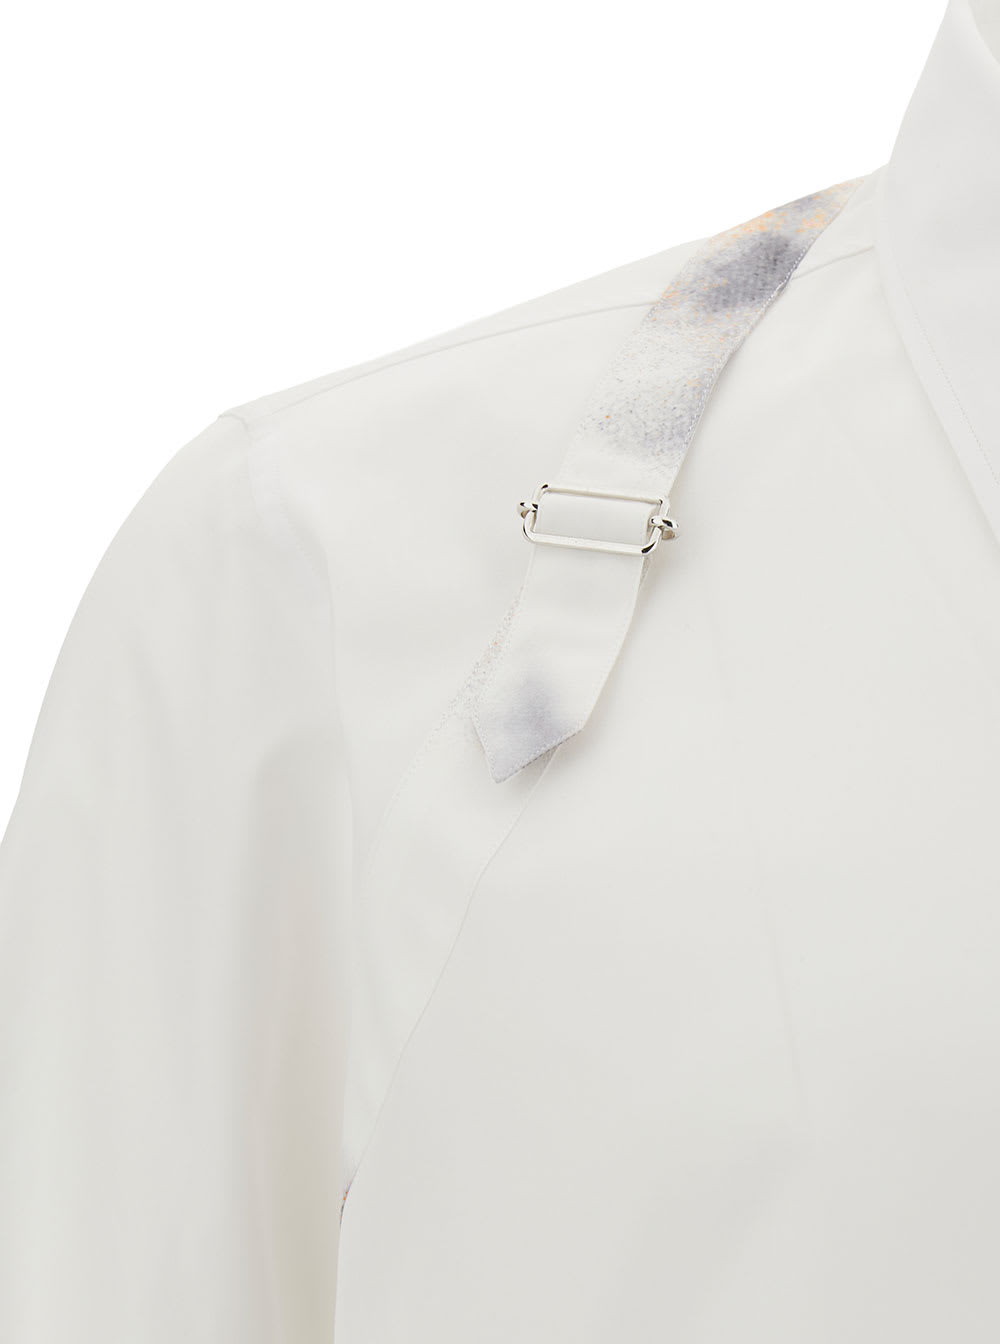 Shop Alexander Mcqueen White Shirt With Printed Harness In Cotton Man